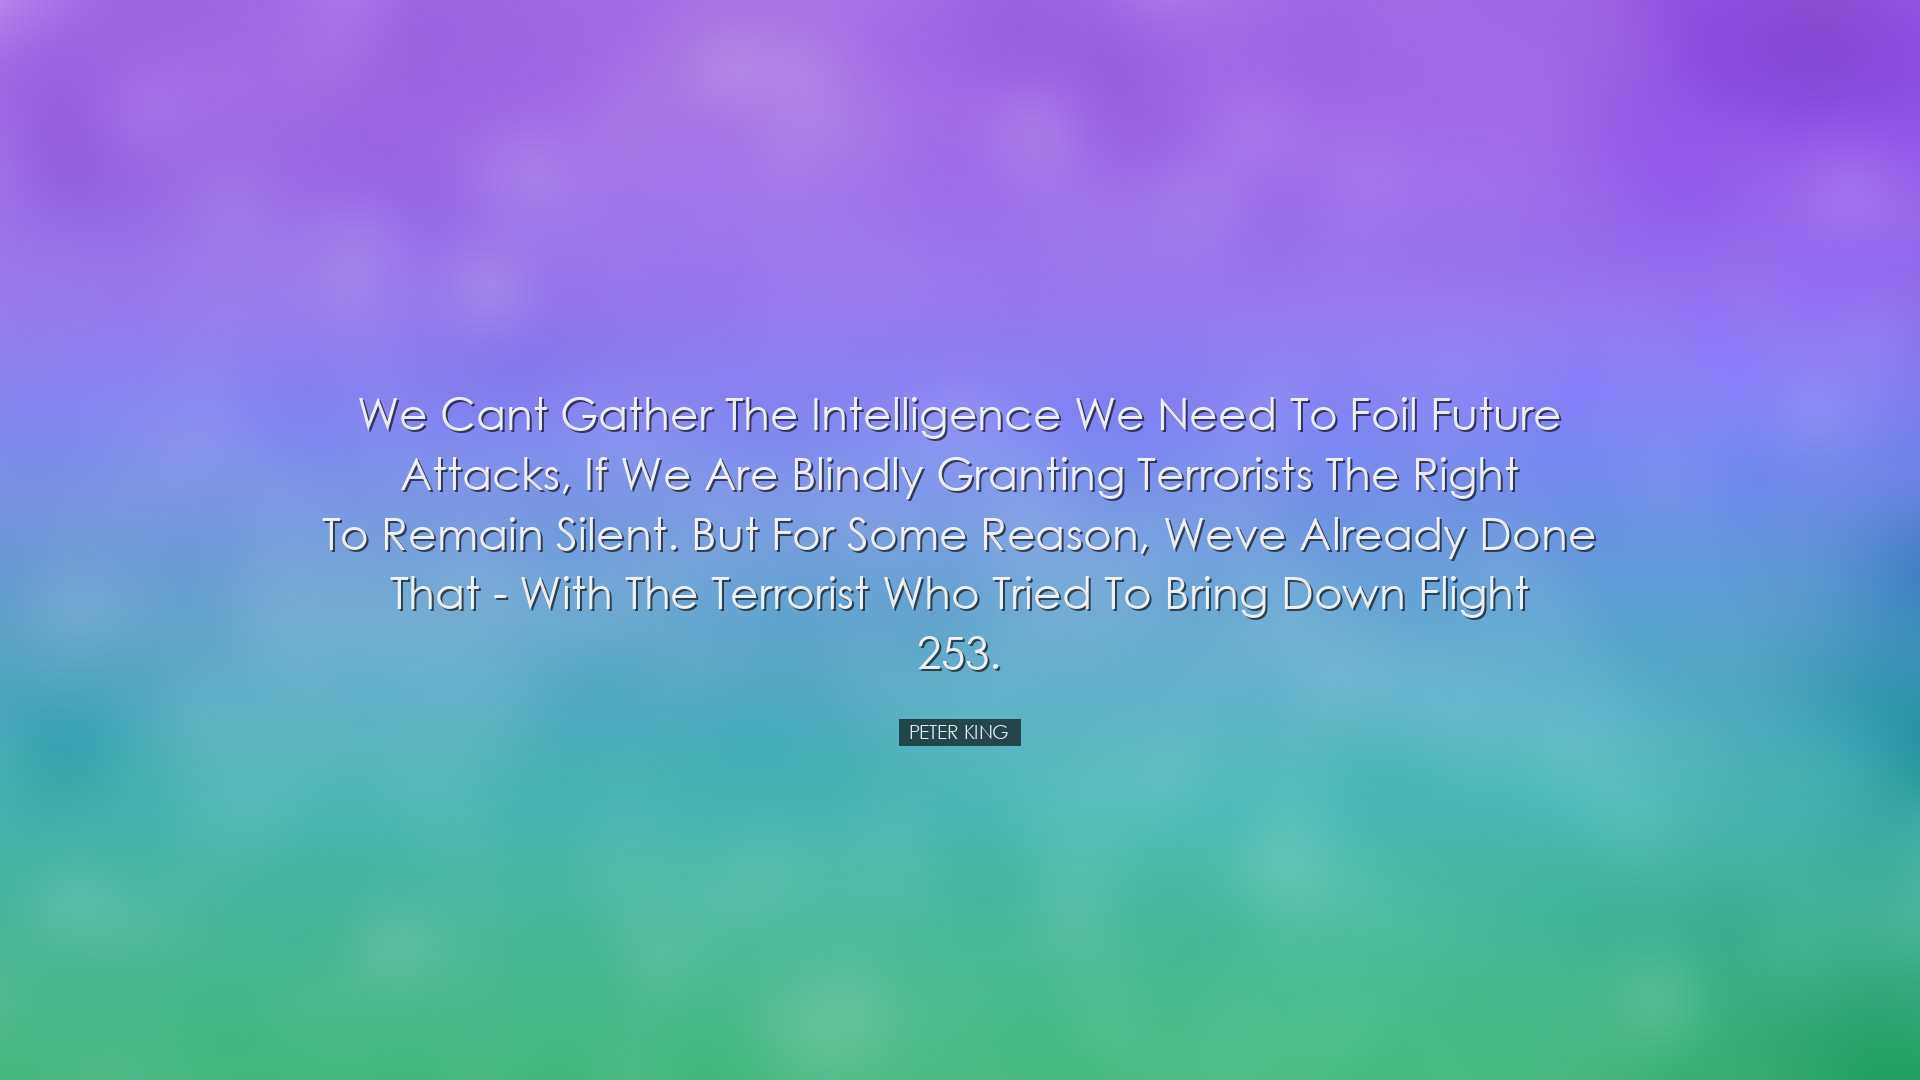 We cant gather the intelligence we need to foil future attacks, if